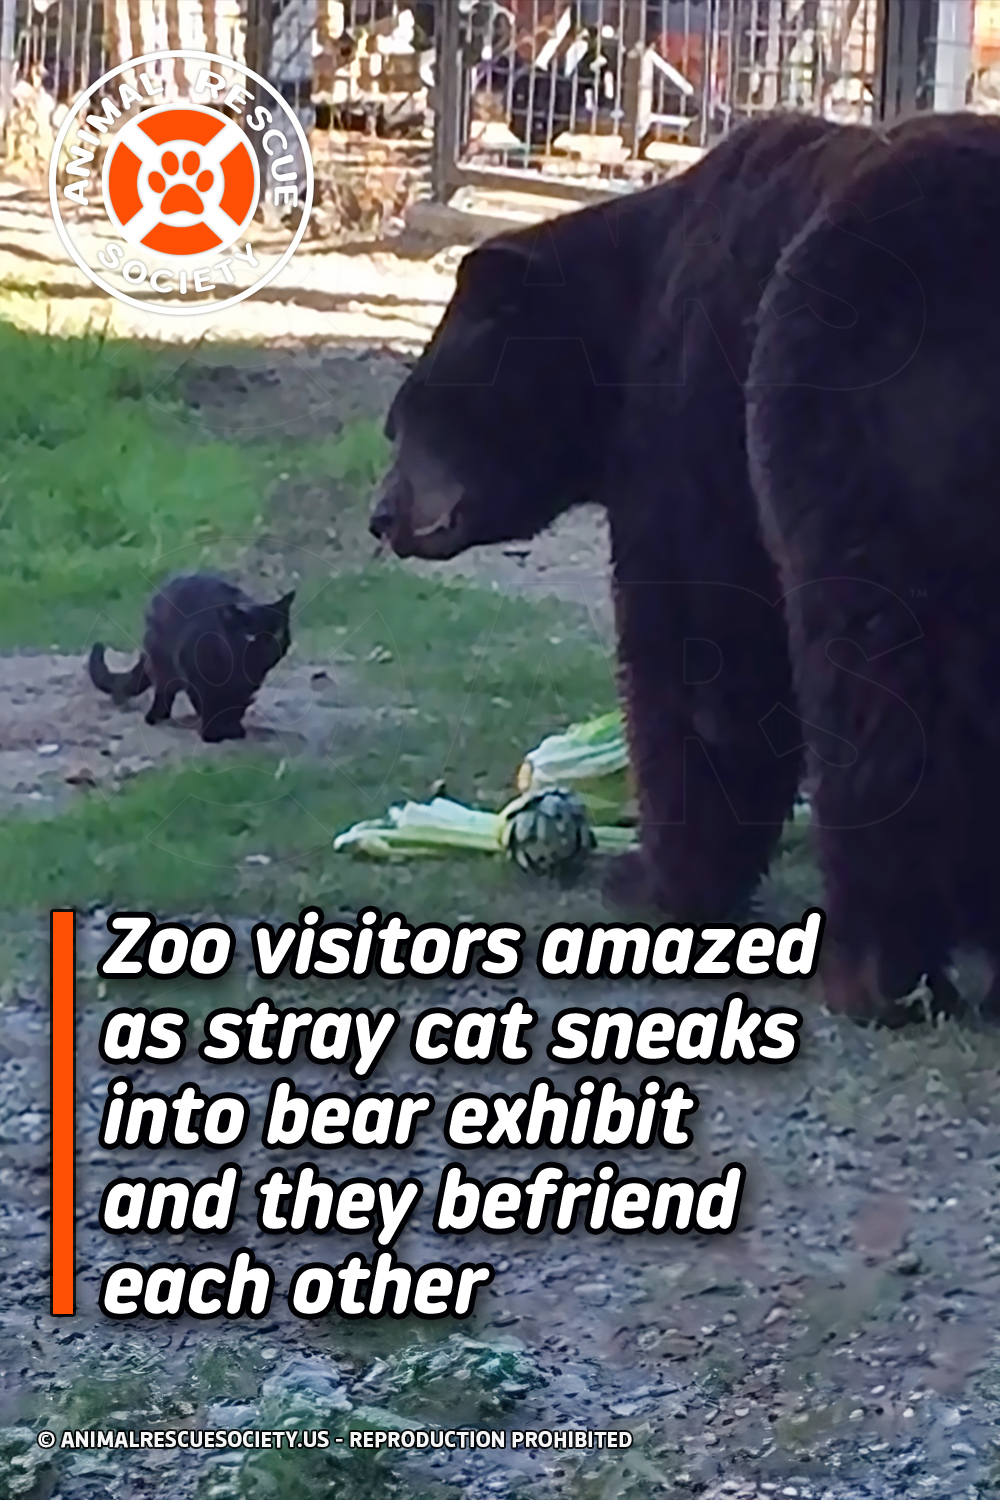 Zoo visitors amazed as stray cat sneaks into bear exhibit and they befriend each other